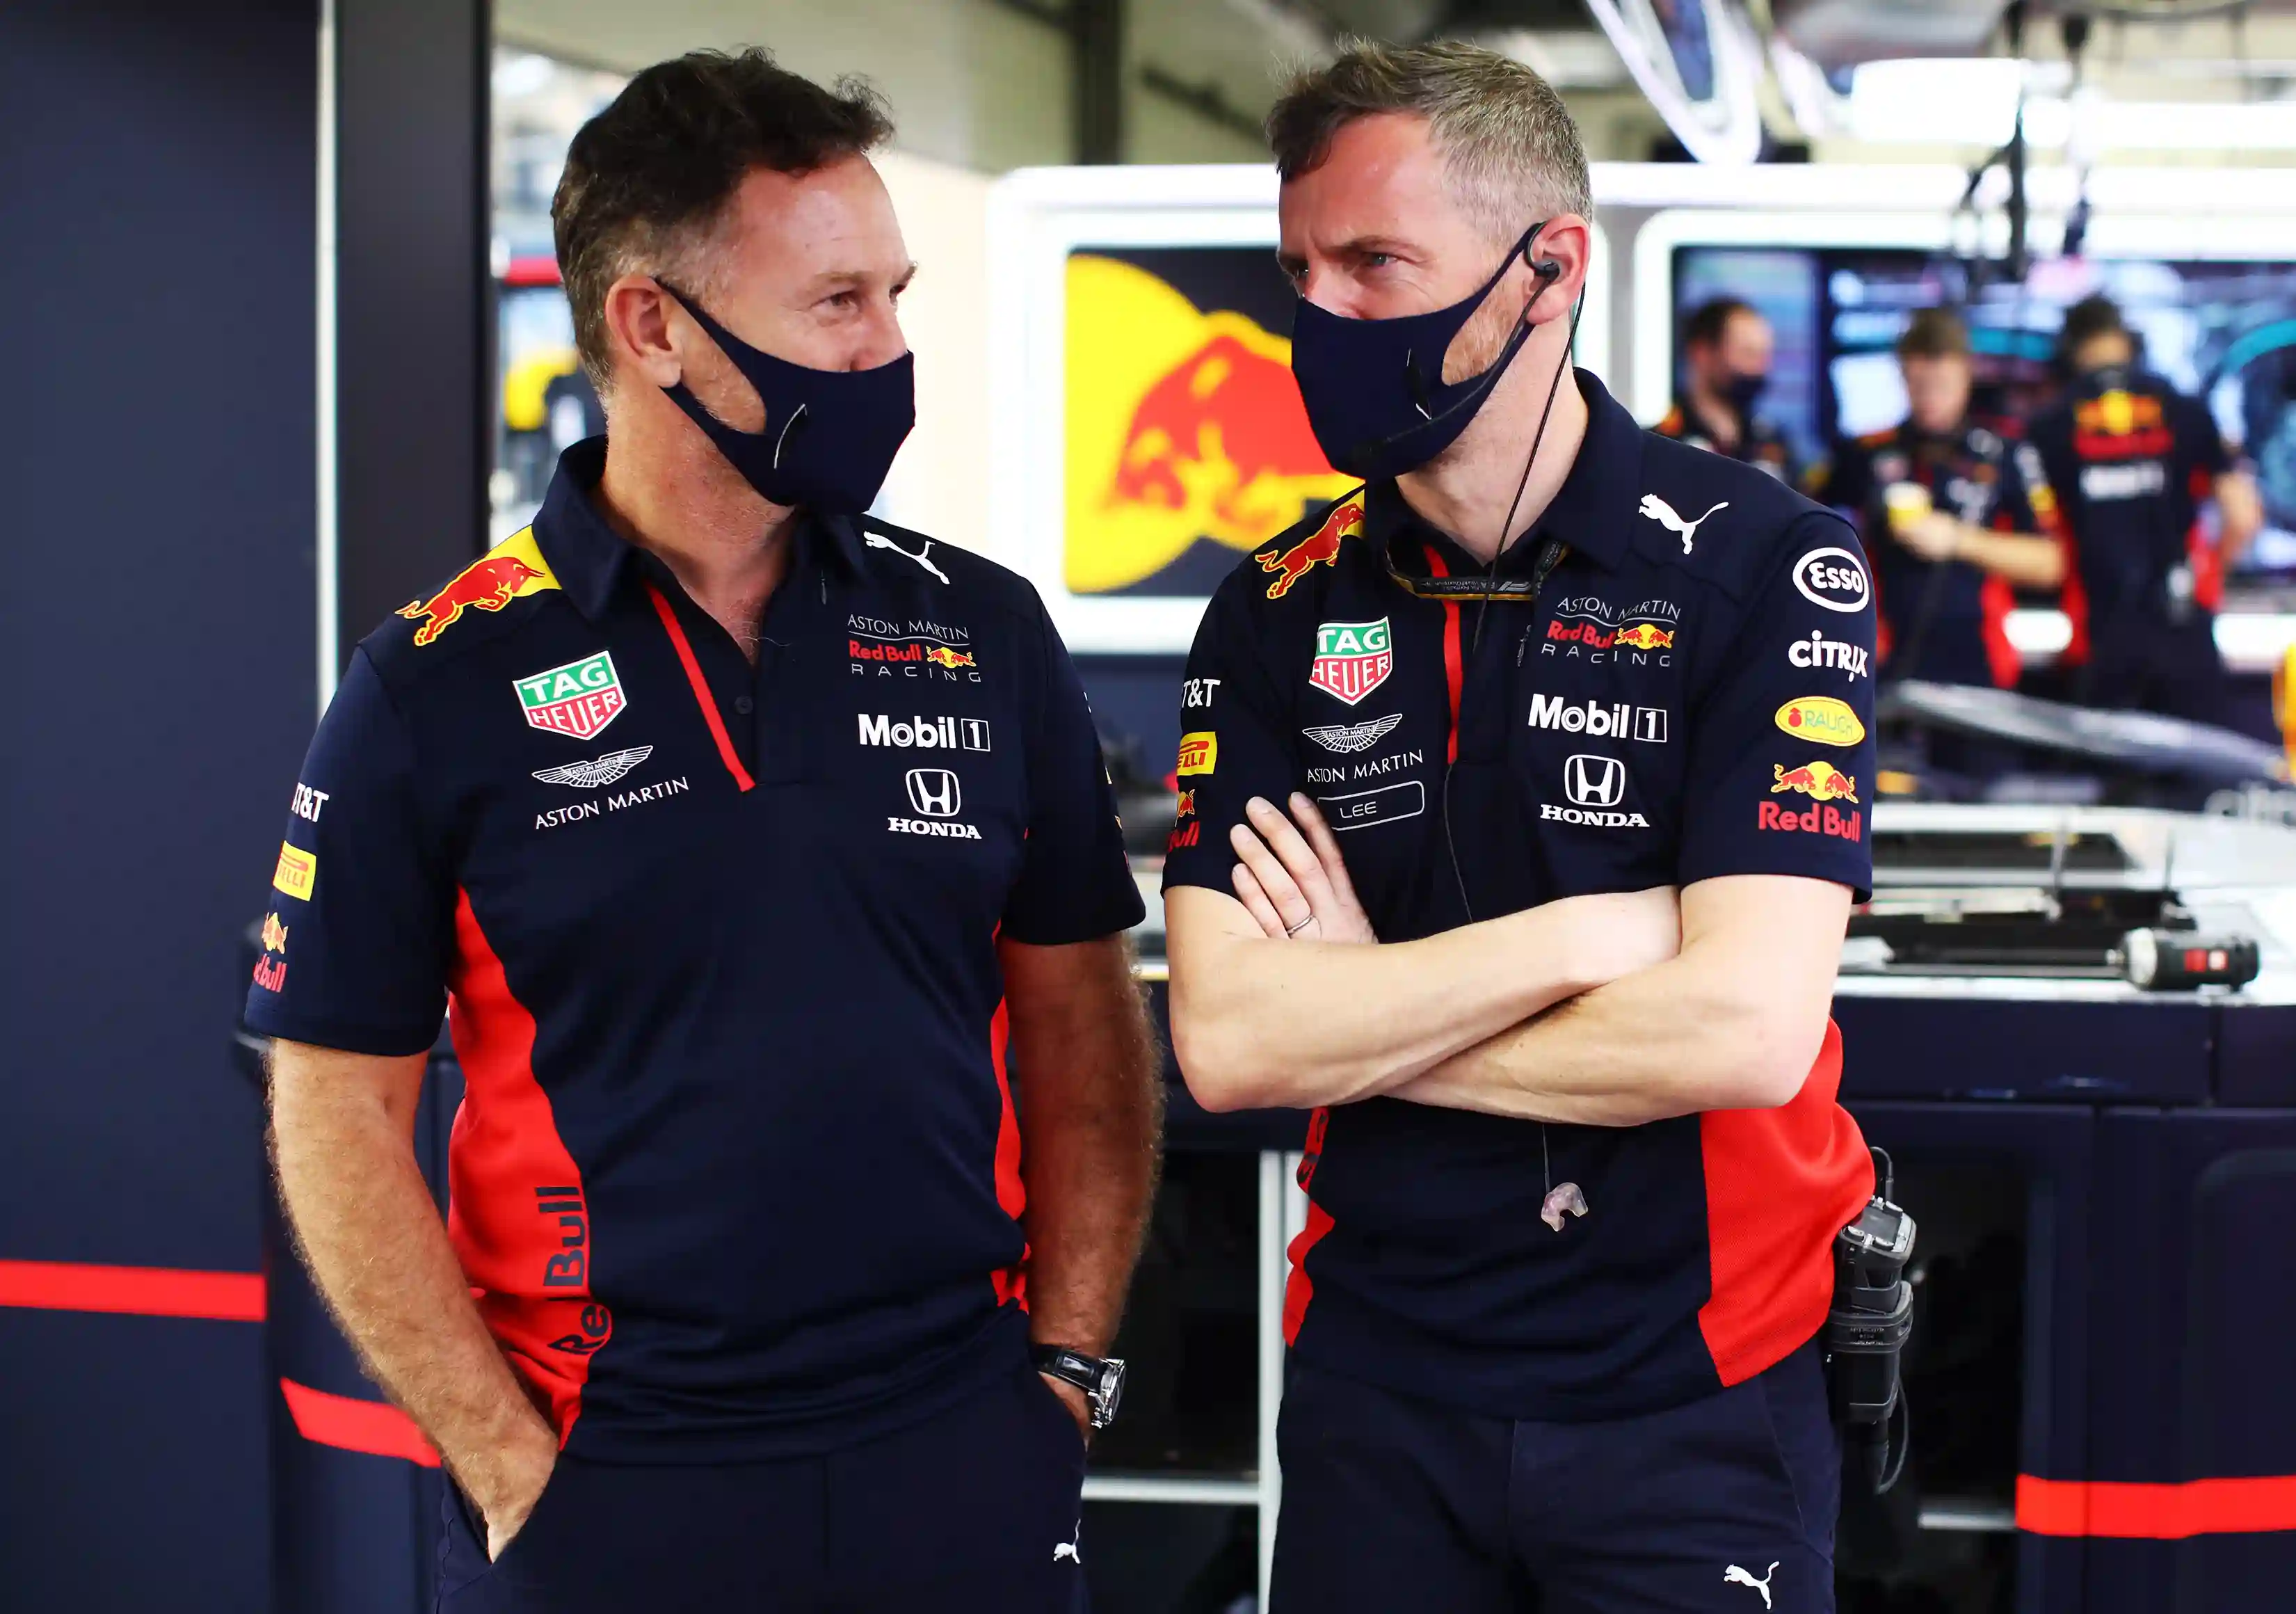 BAHRAIN, BAHRAIN - DECEMBER 04: Red Bull Racing Team Principal Christian Horner talks with Red Bull Racing No1 mechanic Lee Stevenson in the garage during practice ahead of the F1 Grand Prix of Sakhir at Bahrain International Circuit on December 04, 2020 in Bahrain, Bahrain. (Photo by Mark Thompson/Getty Images)